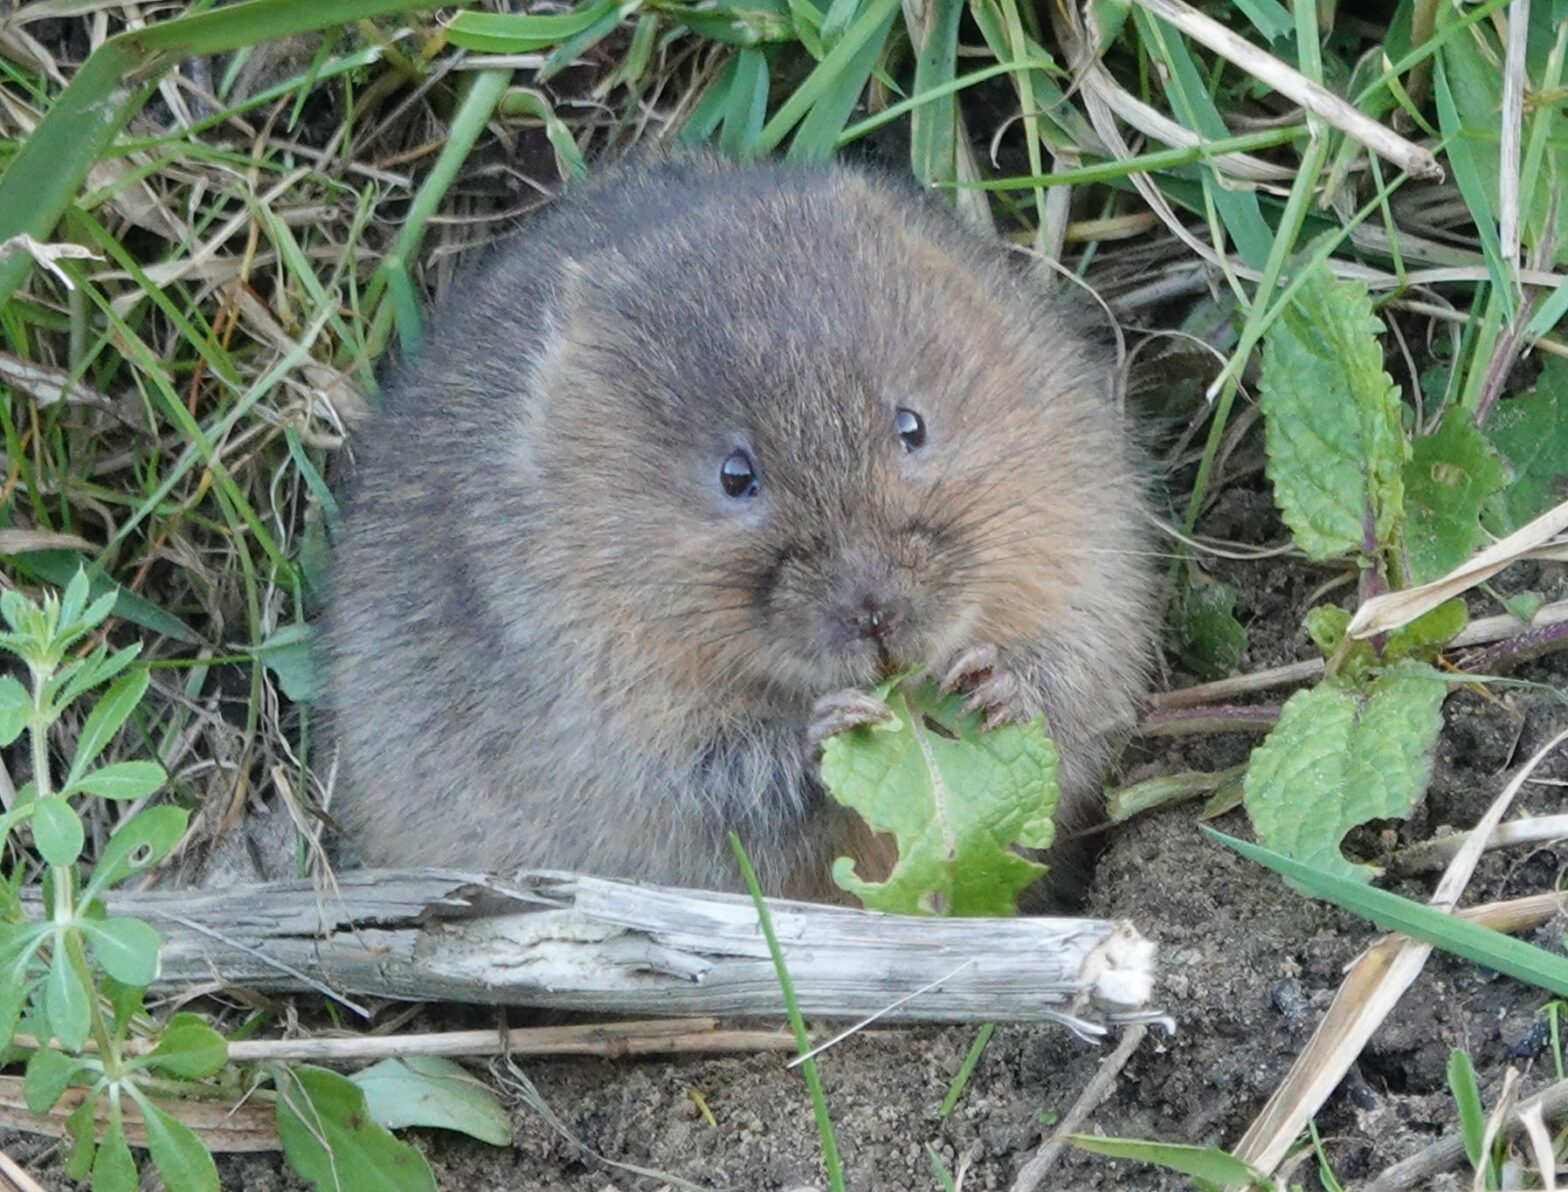 The water vole has chestnut-brown fur, a blunt, rounded nose, small ears, and a furry tail.